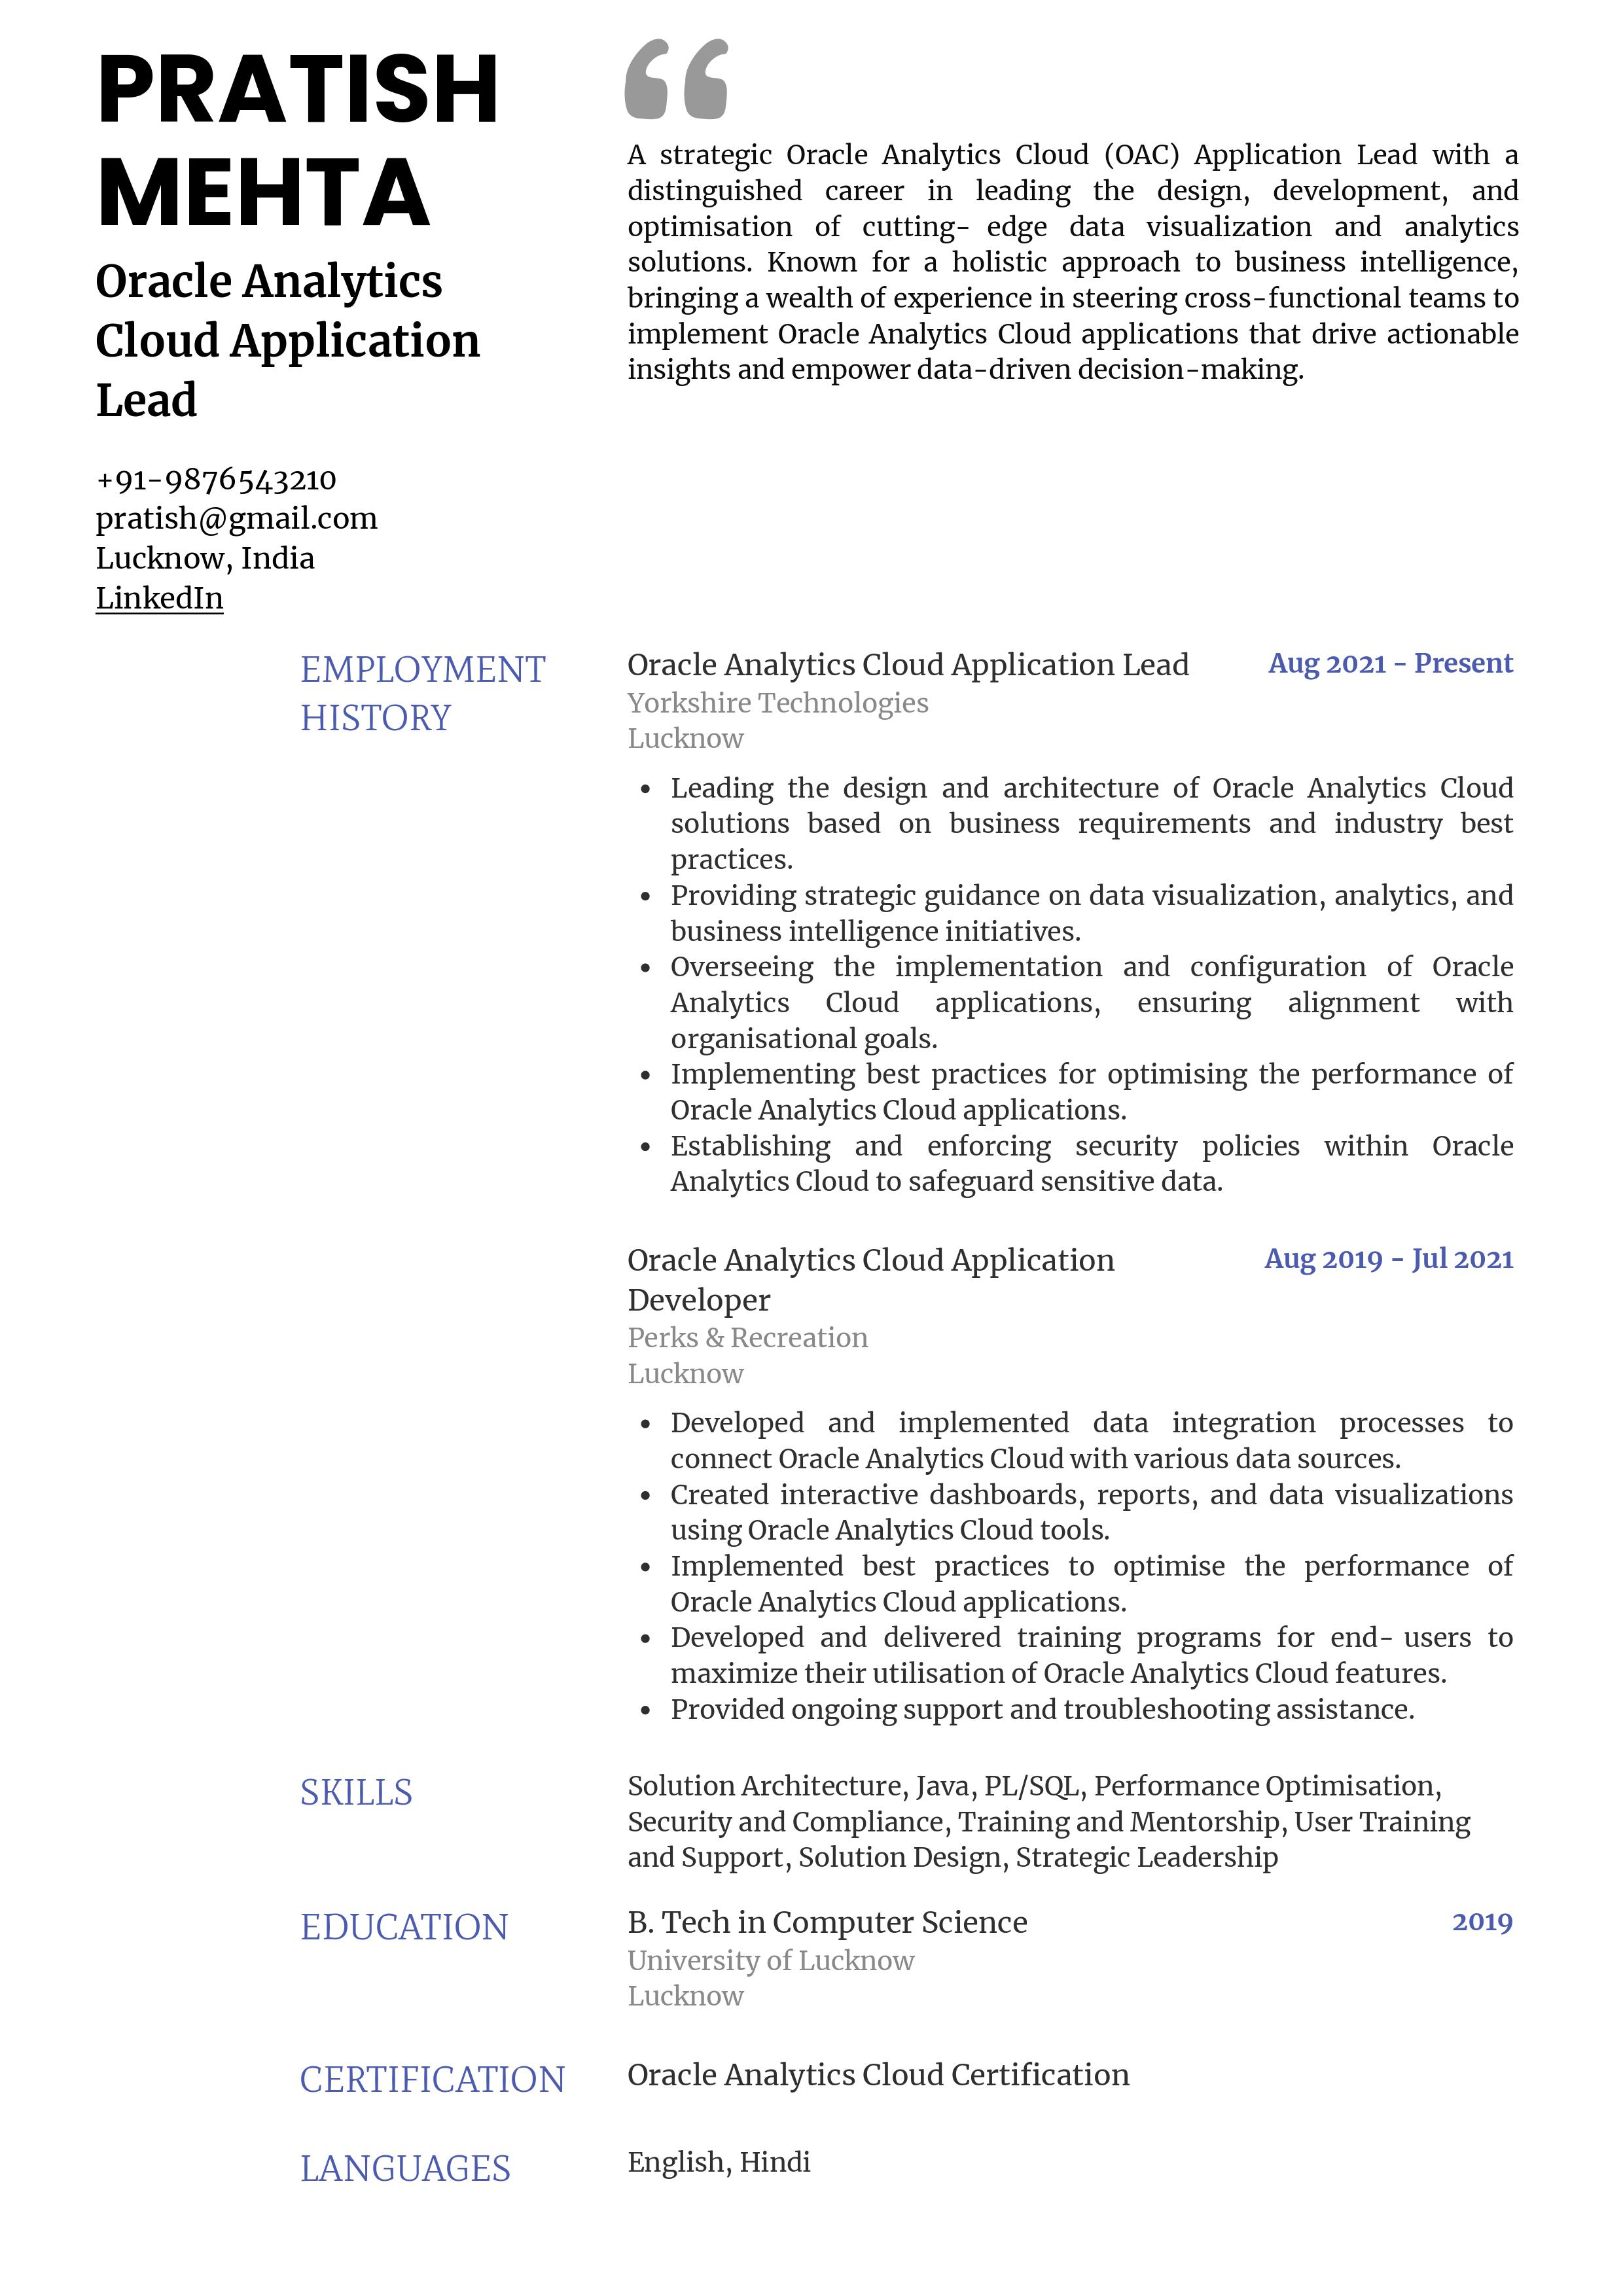 Sample Resume of Oracle Analytics Cloud Application Lead | Free Resume Templates & Samples on Resumod.co